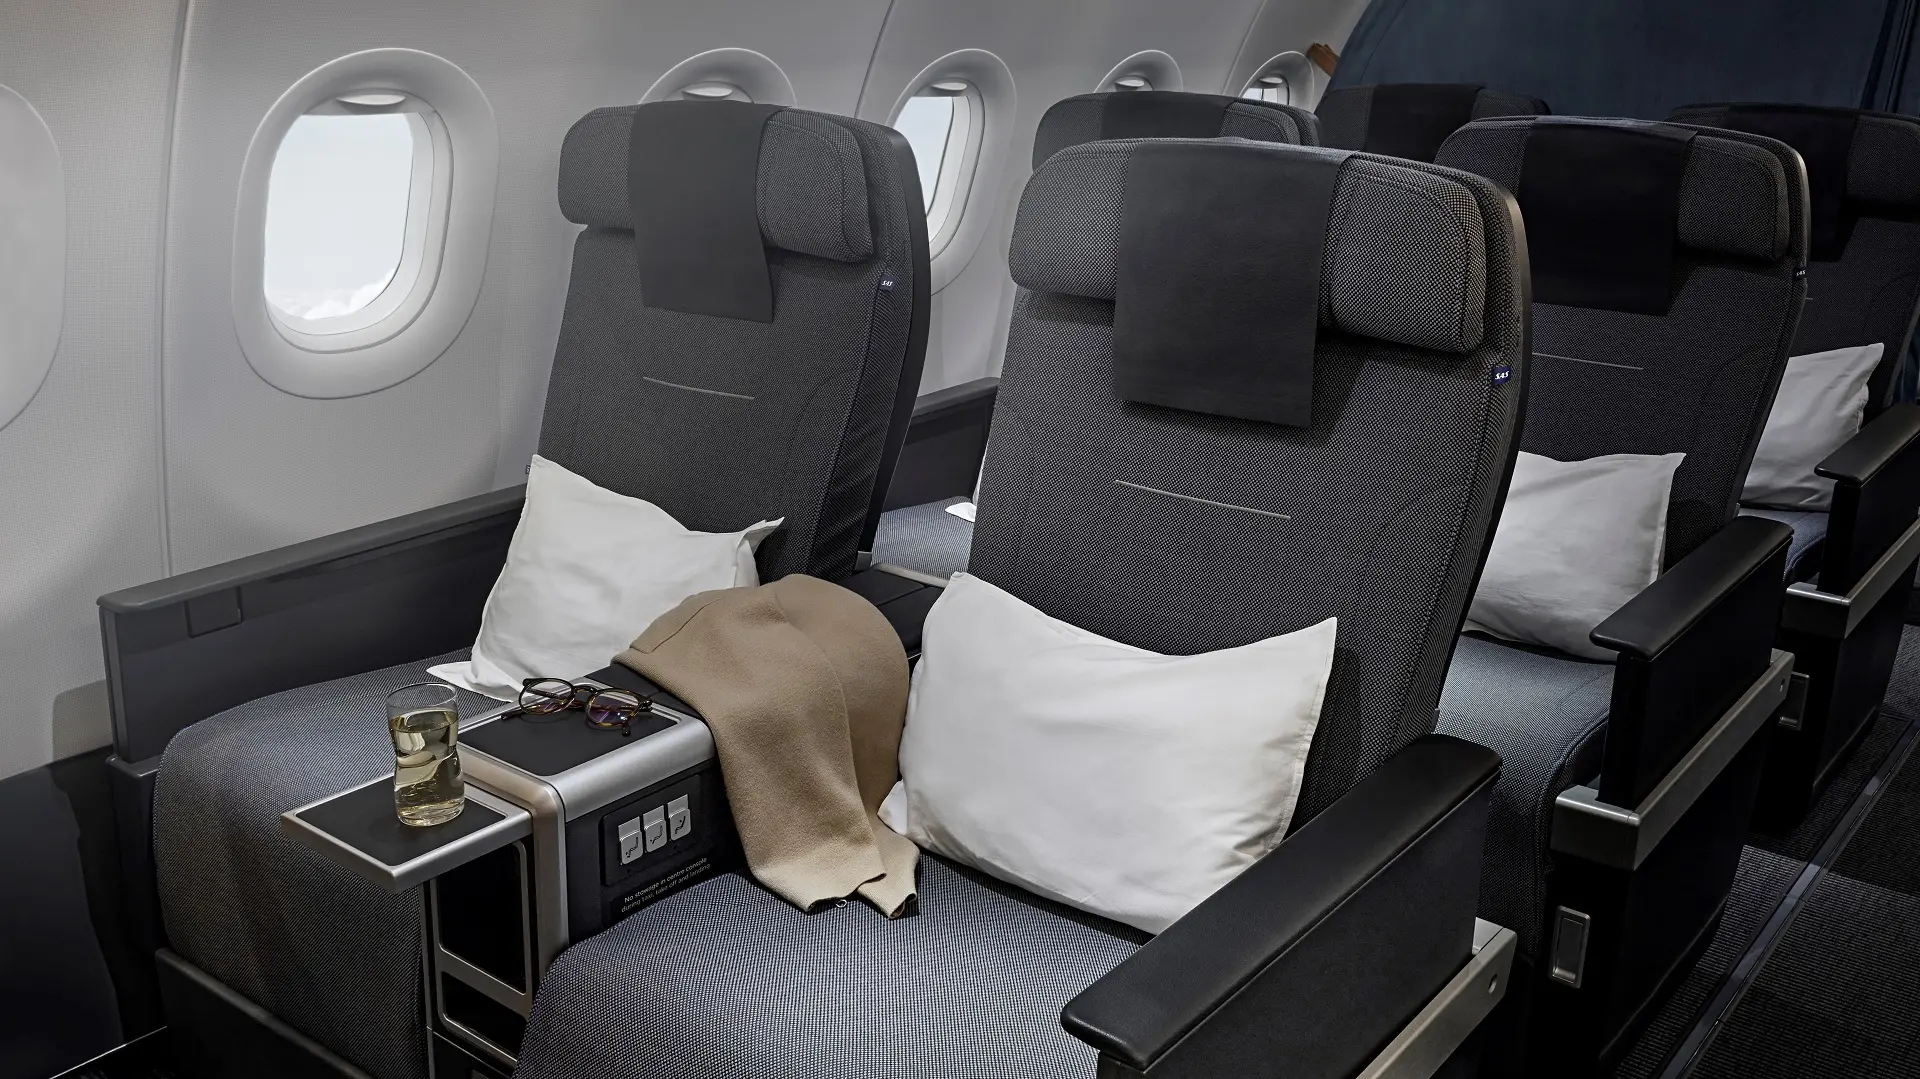 Airlines News - SAS rolls out its new A321LR Business Class cabin